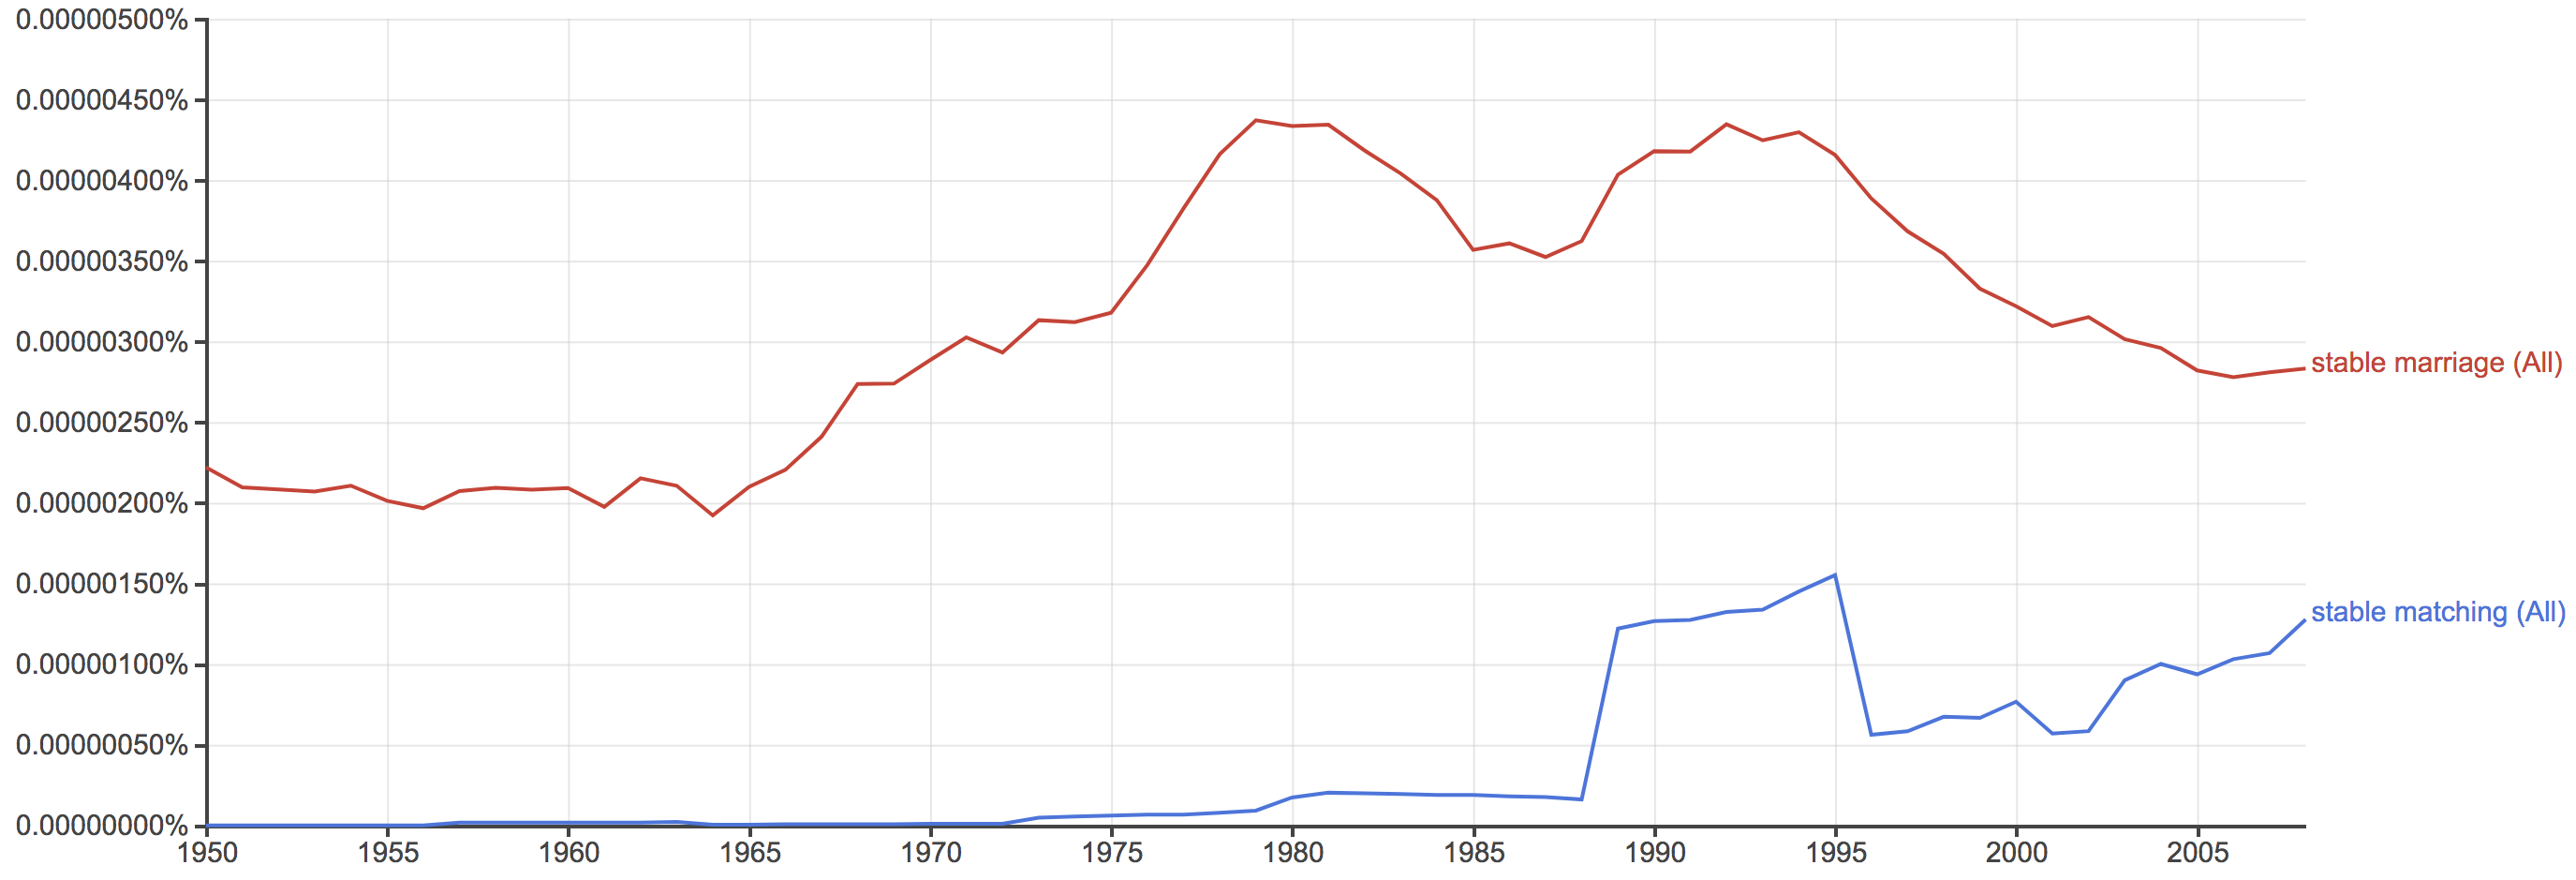 Stable matching vs stable marriage Google ngram